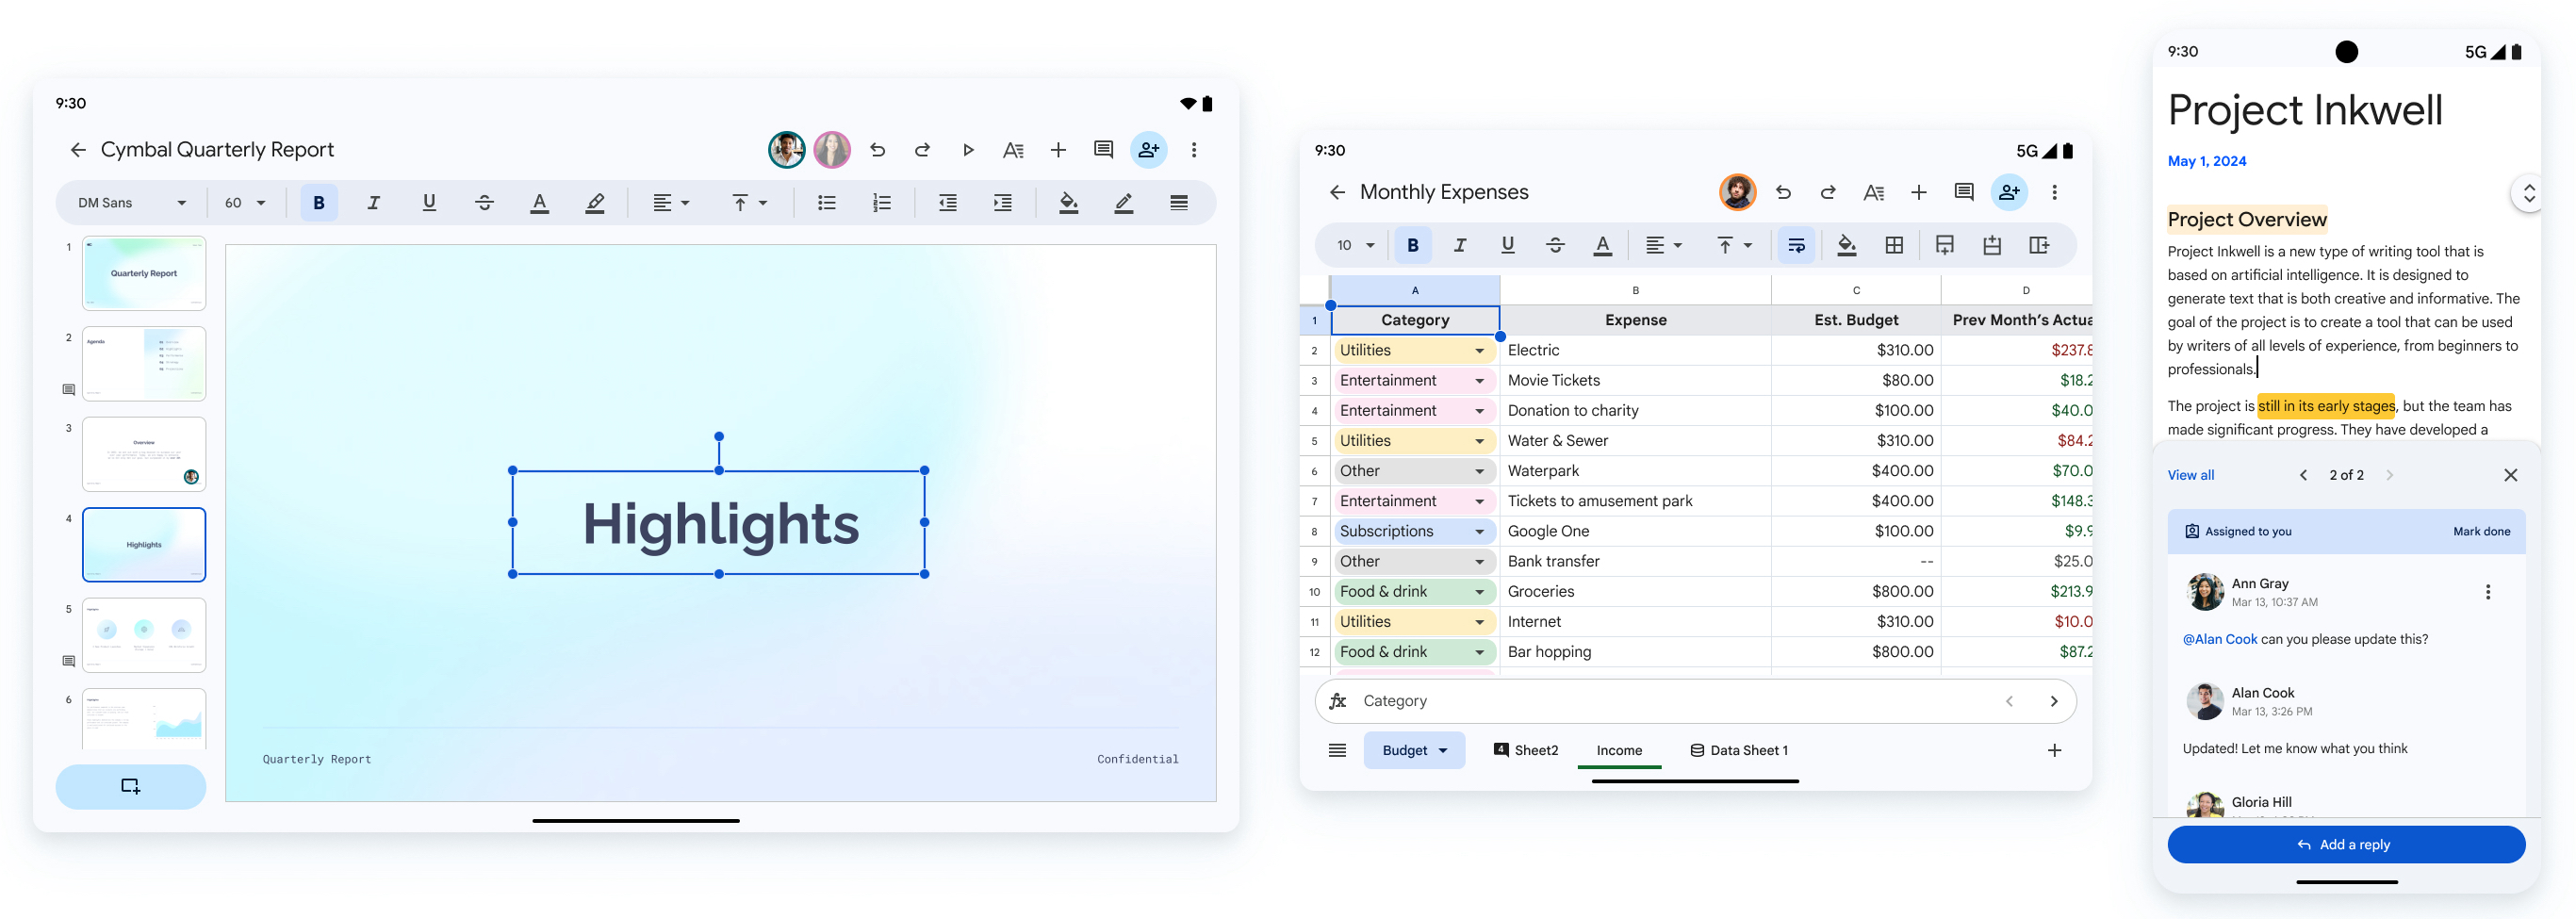 A new look for Google Docs, Sheets, and Slides apps on Android devices